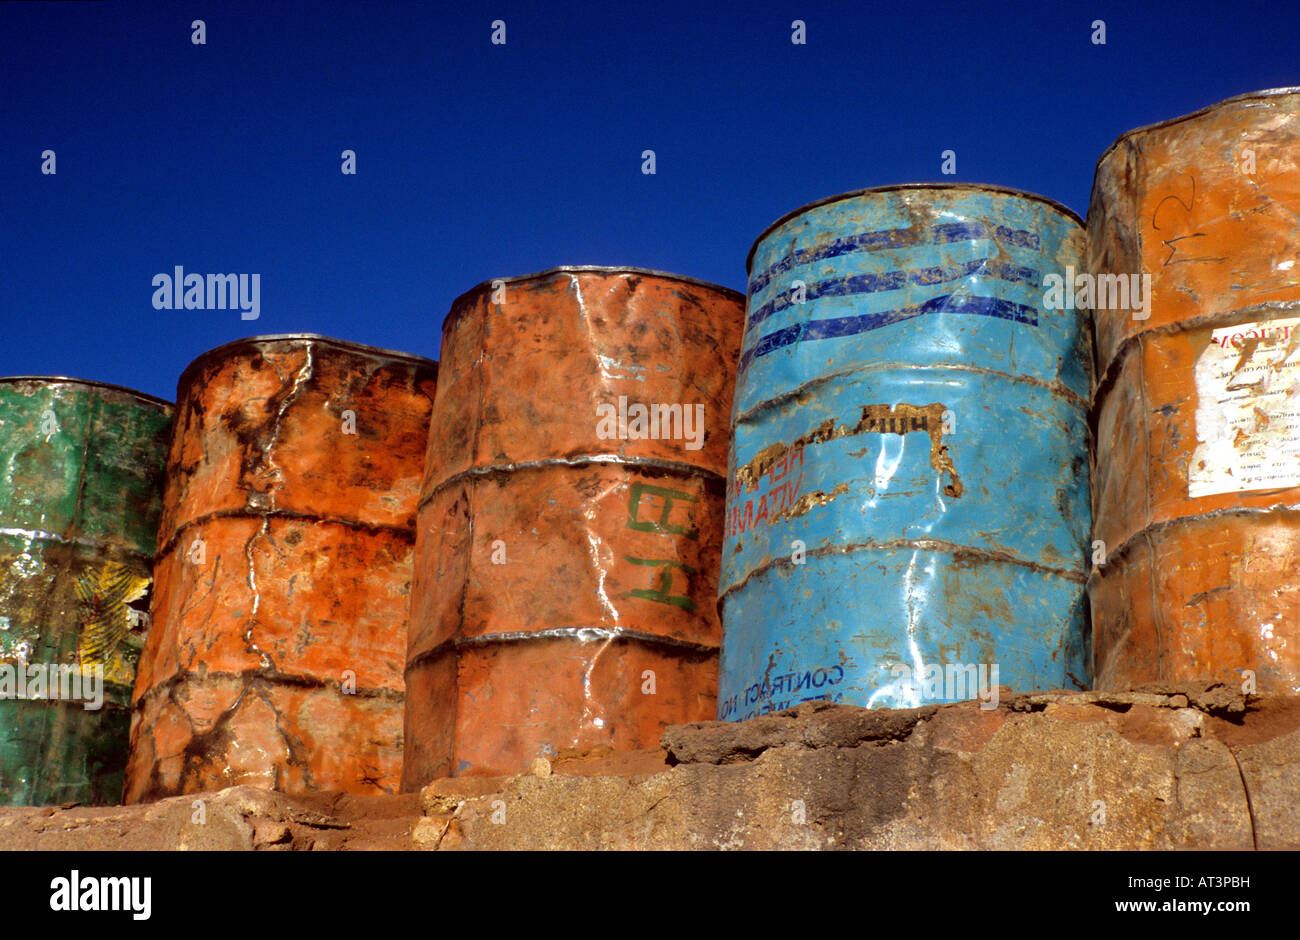 Brightly painted oil drums, Mopti harbour, Mali, West Africa Stock Photo